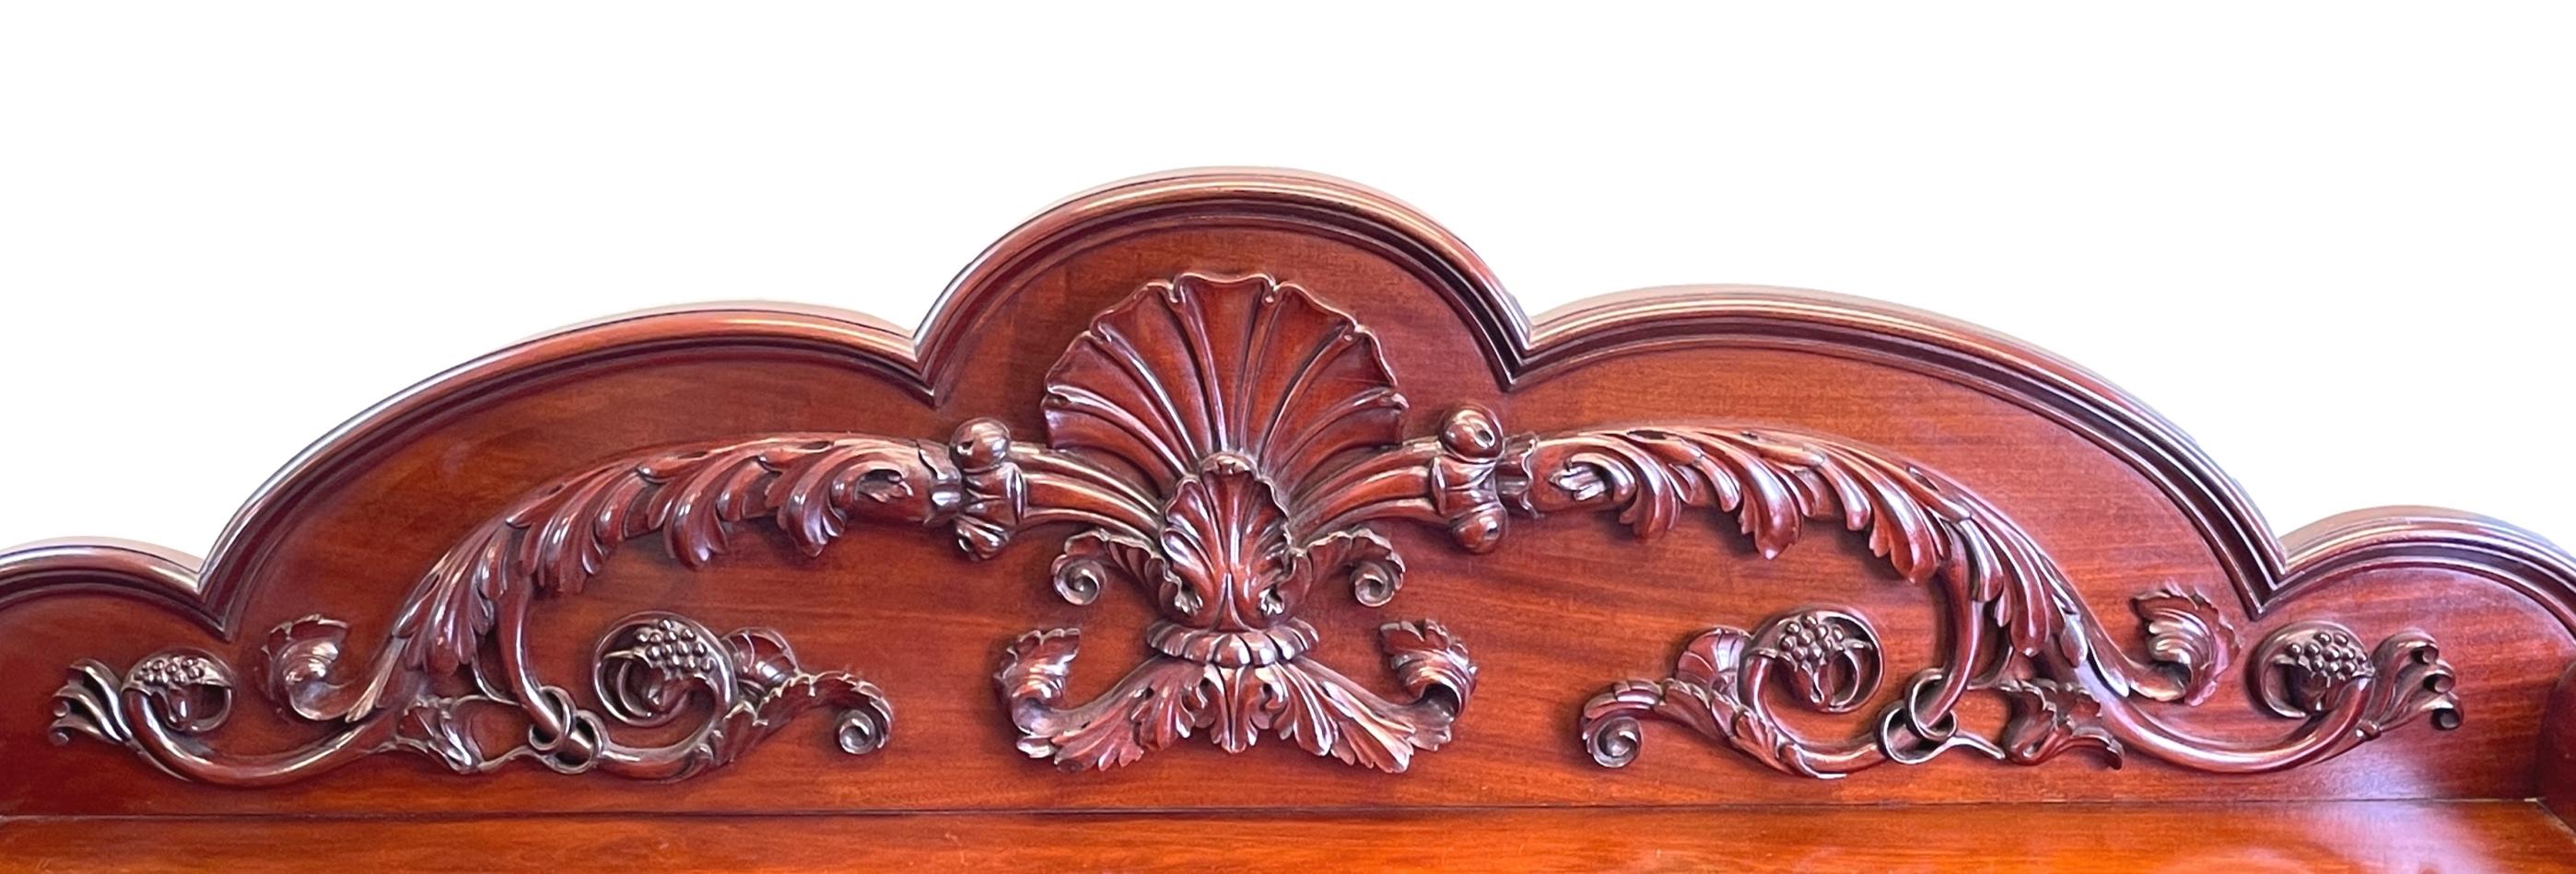 Mahogany 19th Century Carved Buffet For Sale 1